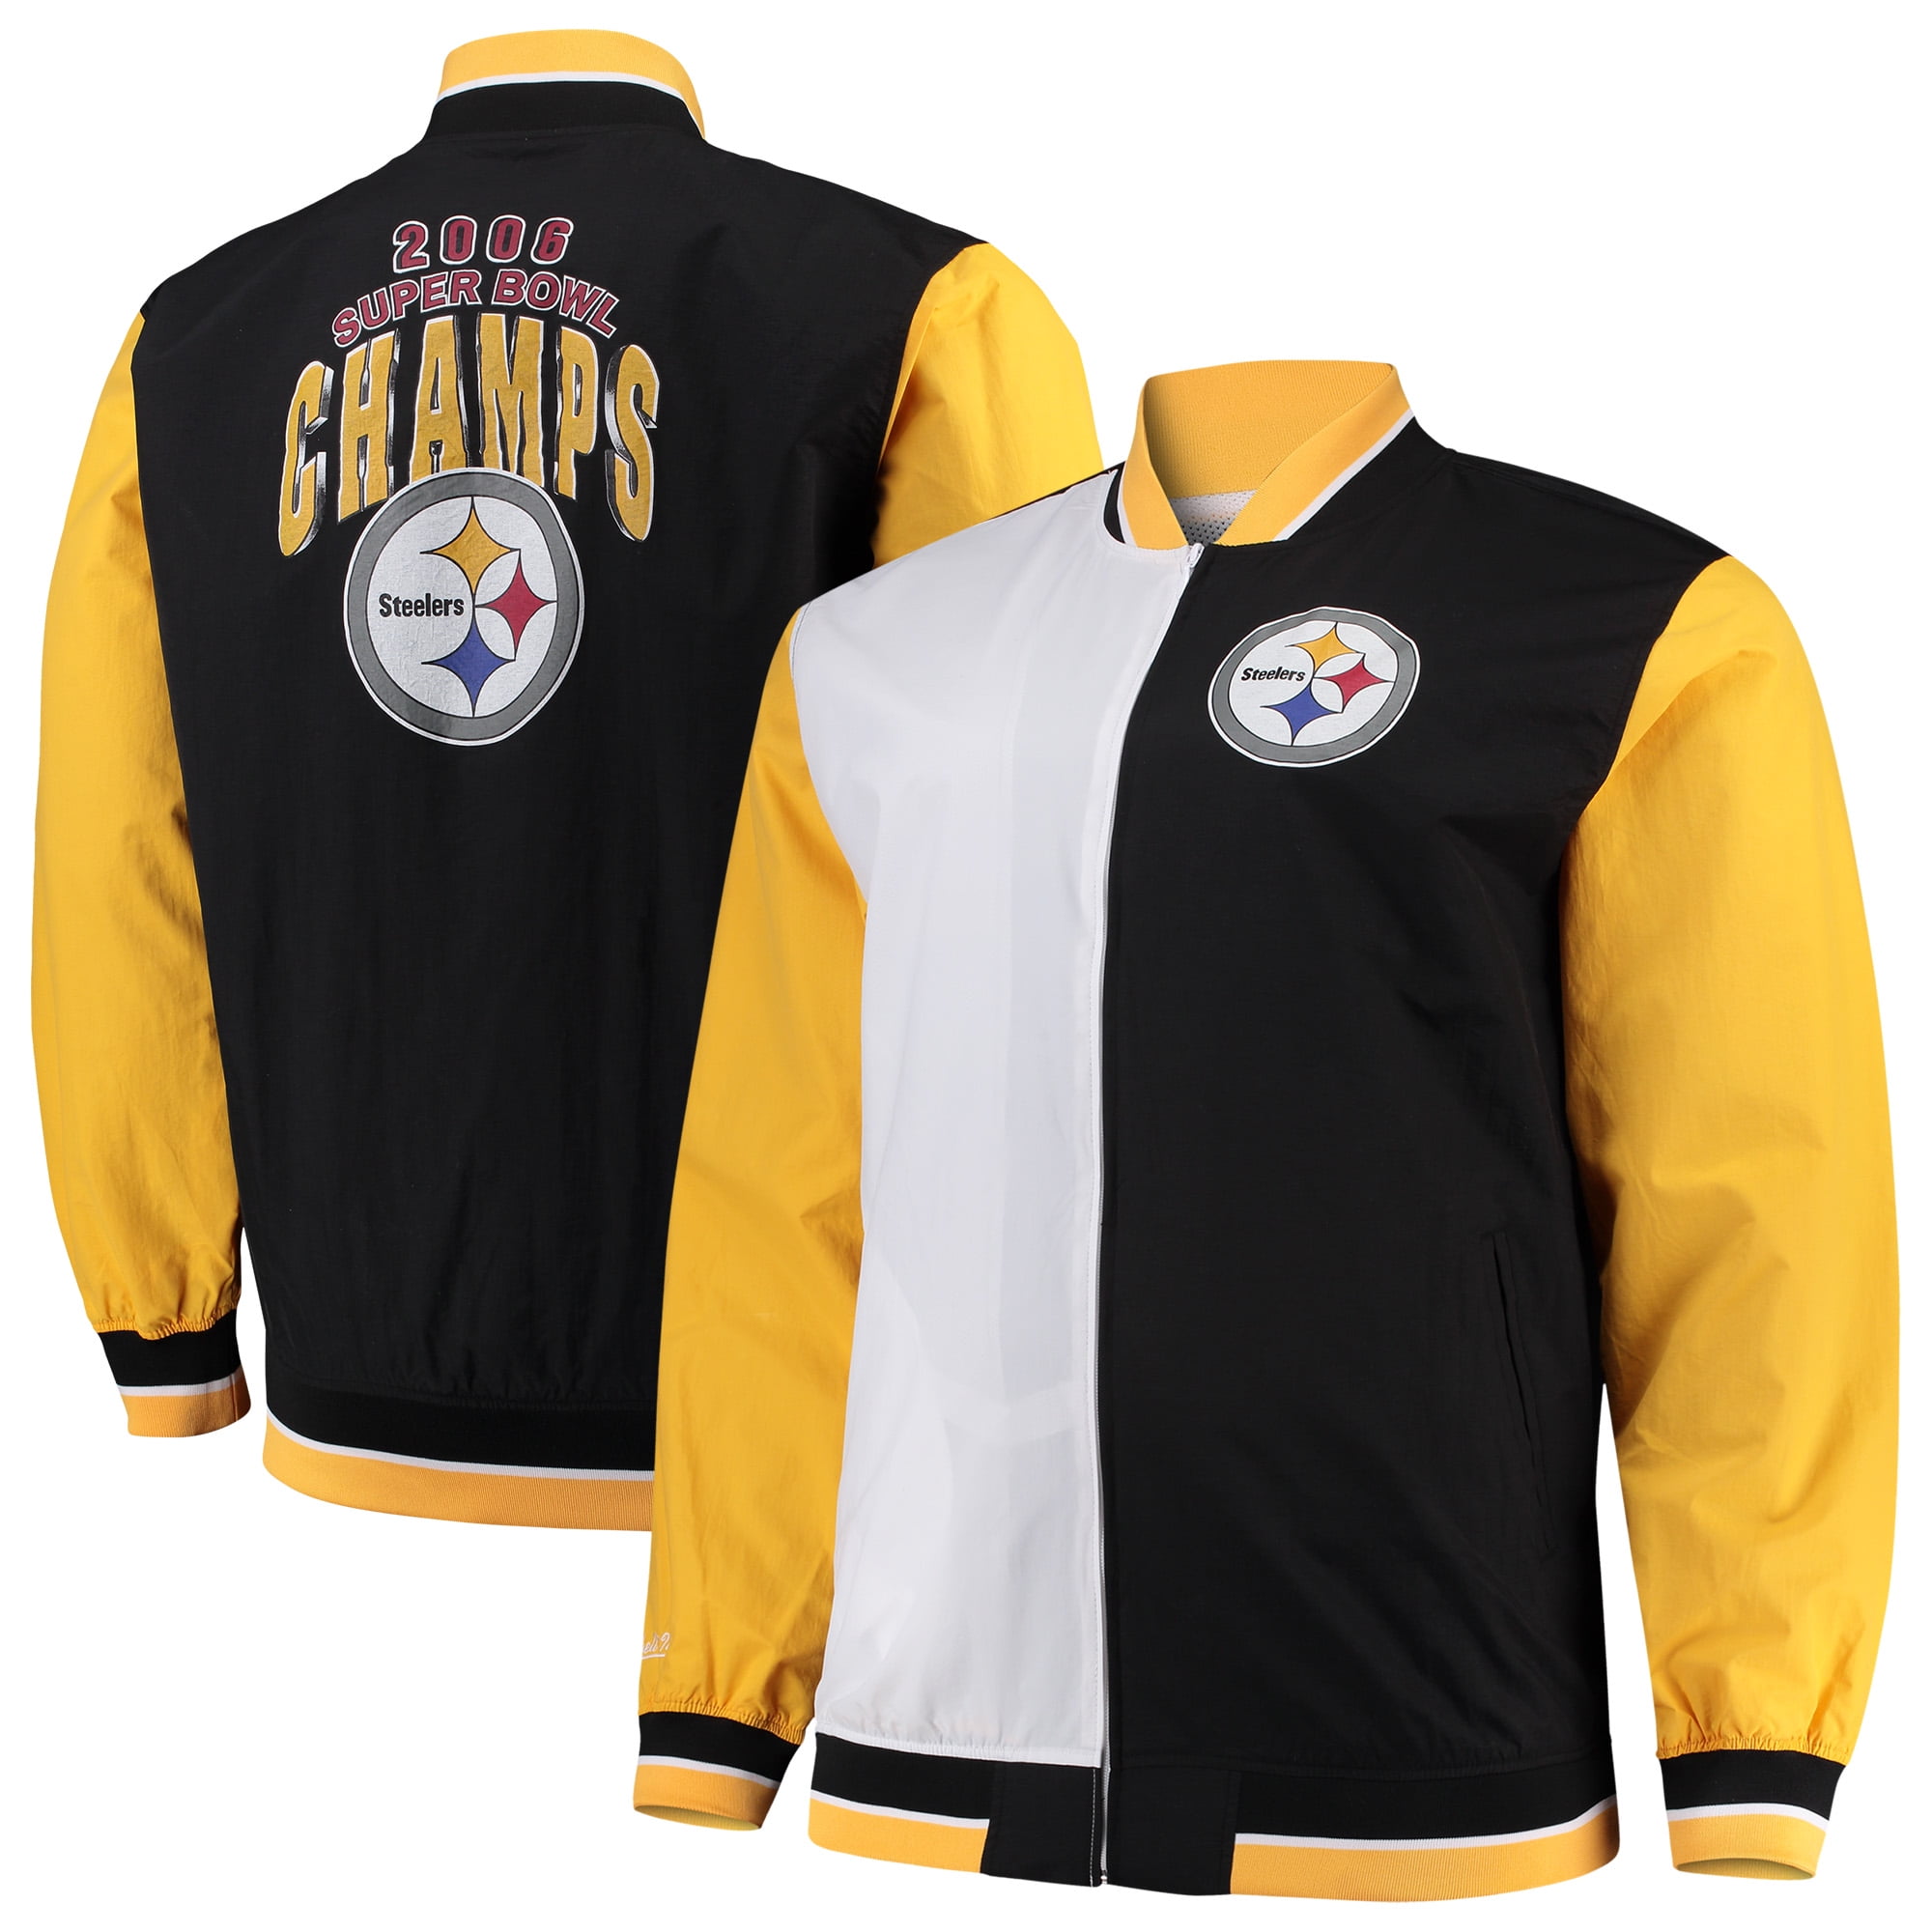 big and tall pittsburgh steelers jerseys